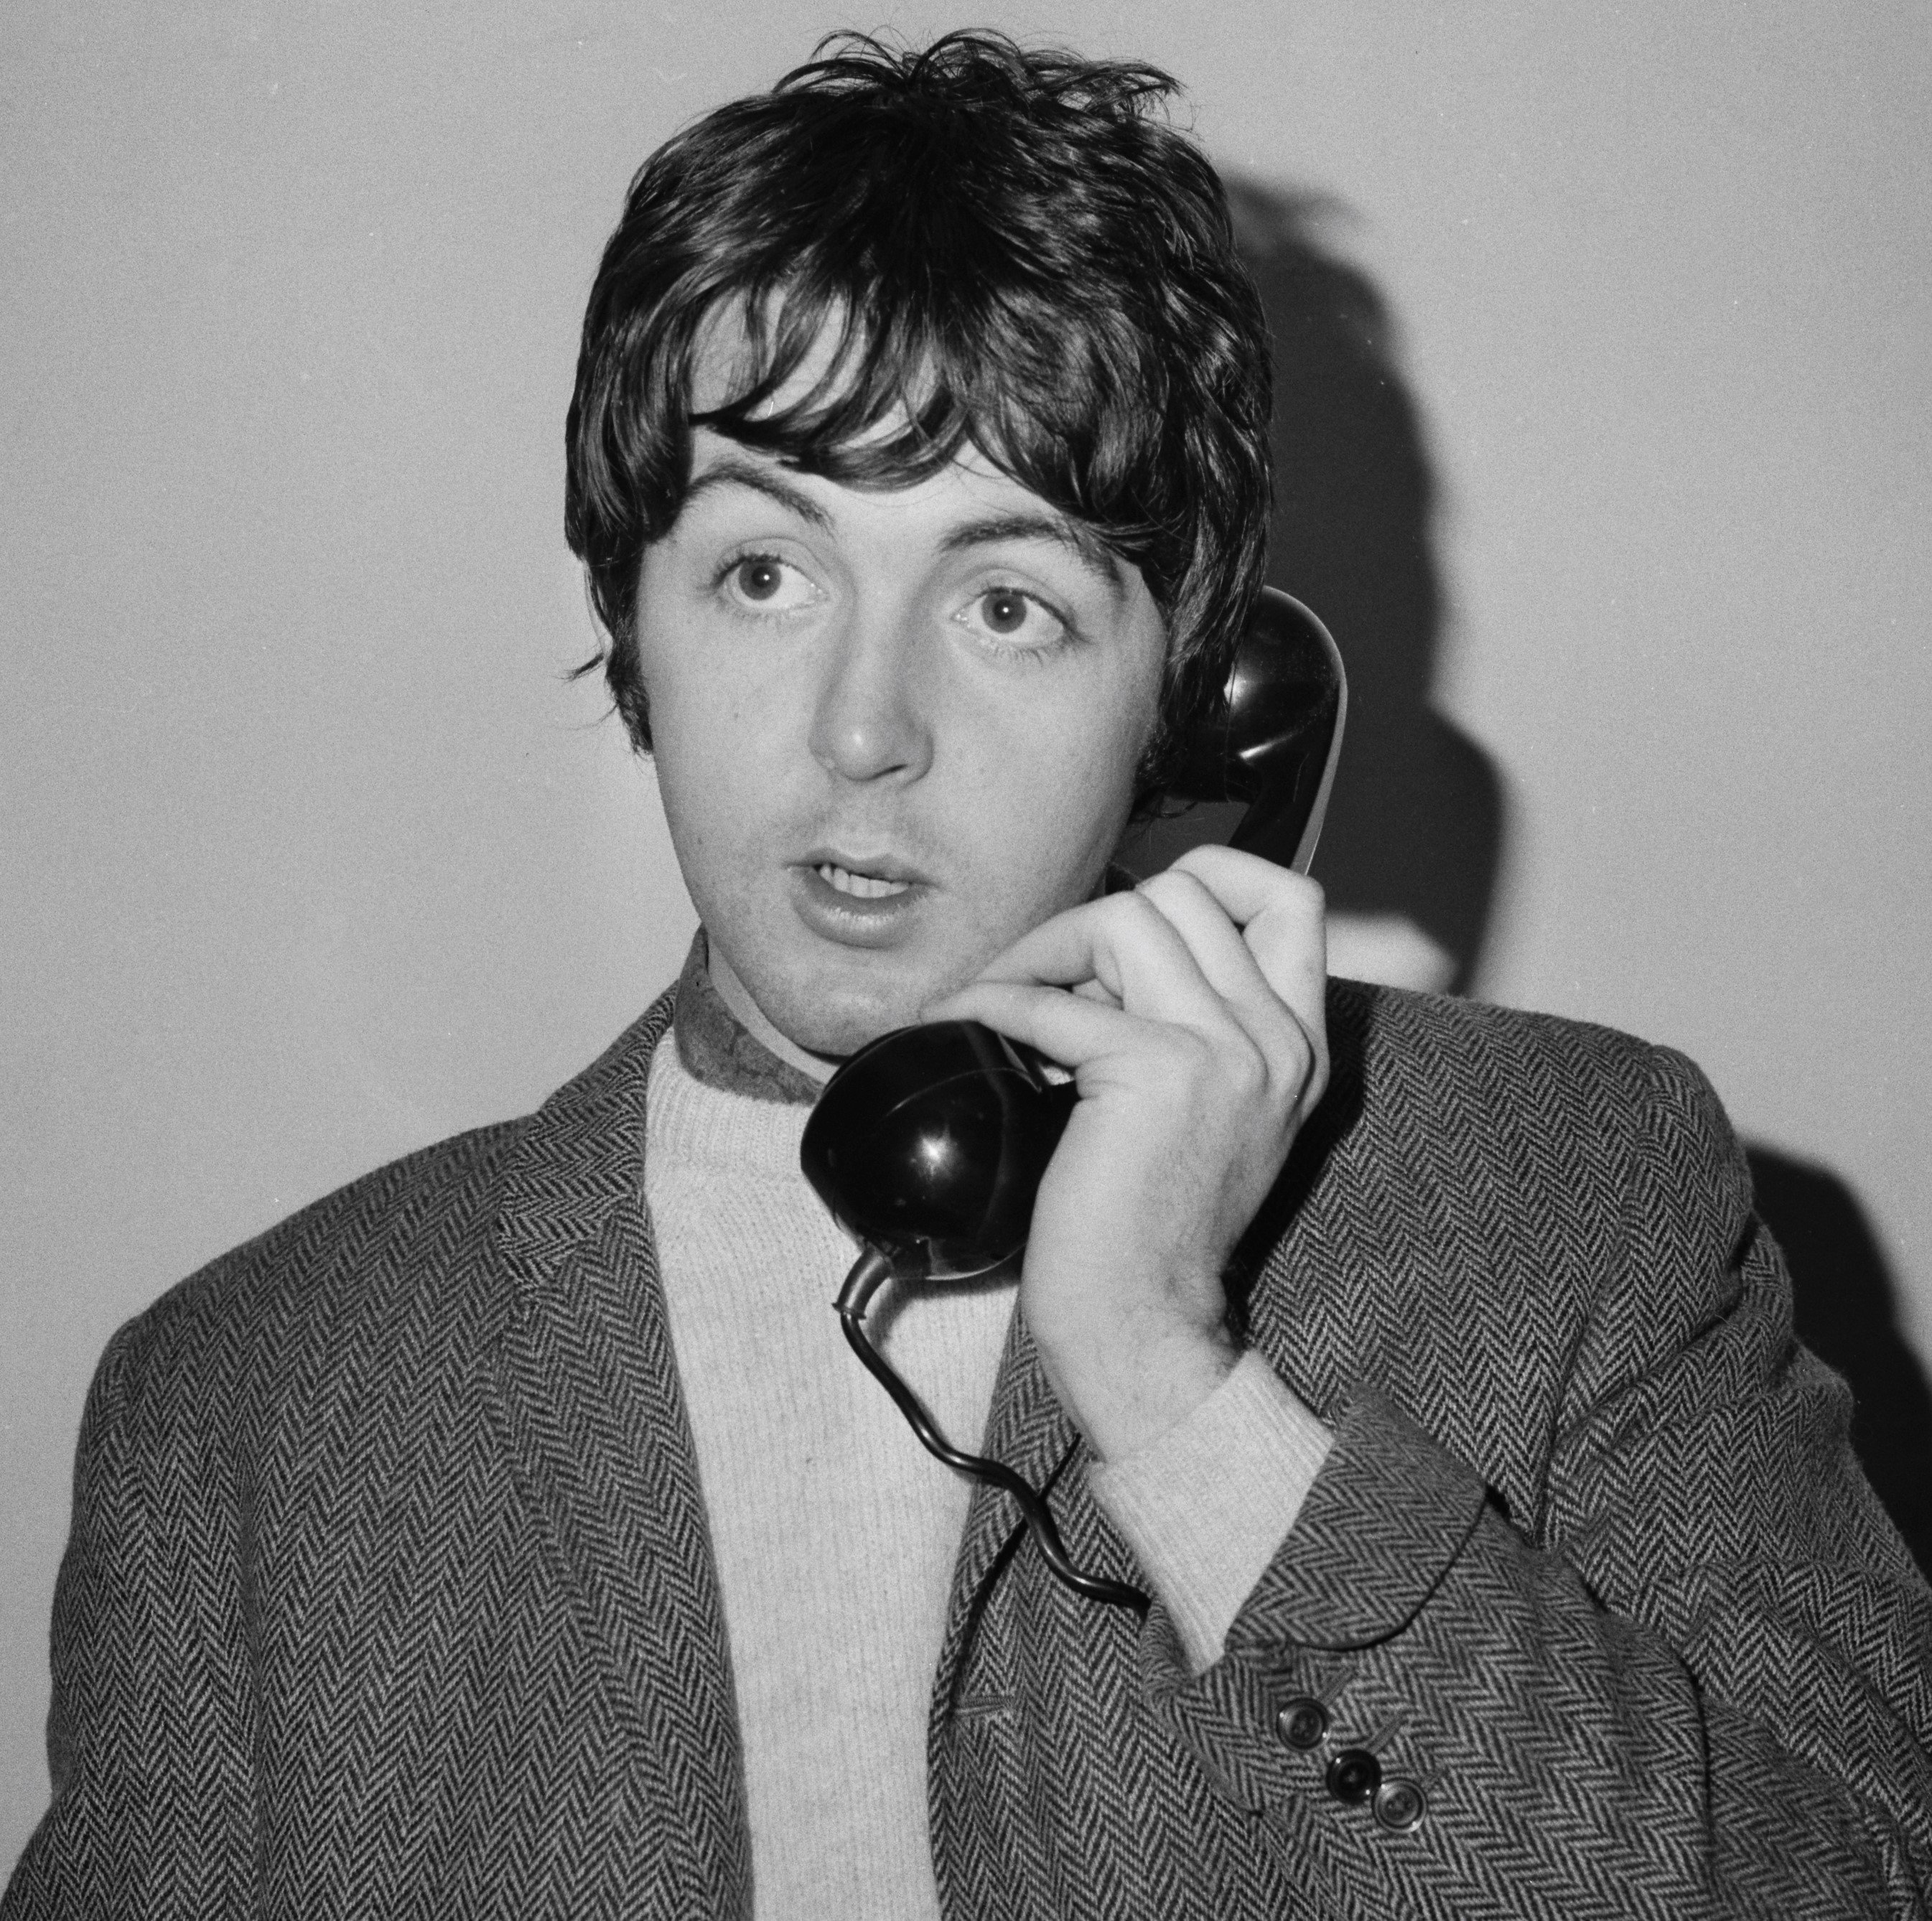 Paul McCartney with a phone during The Beatles' "All My Loving" era